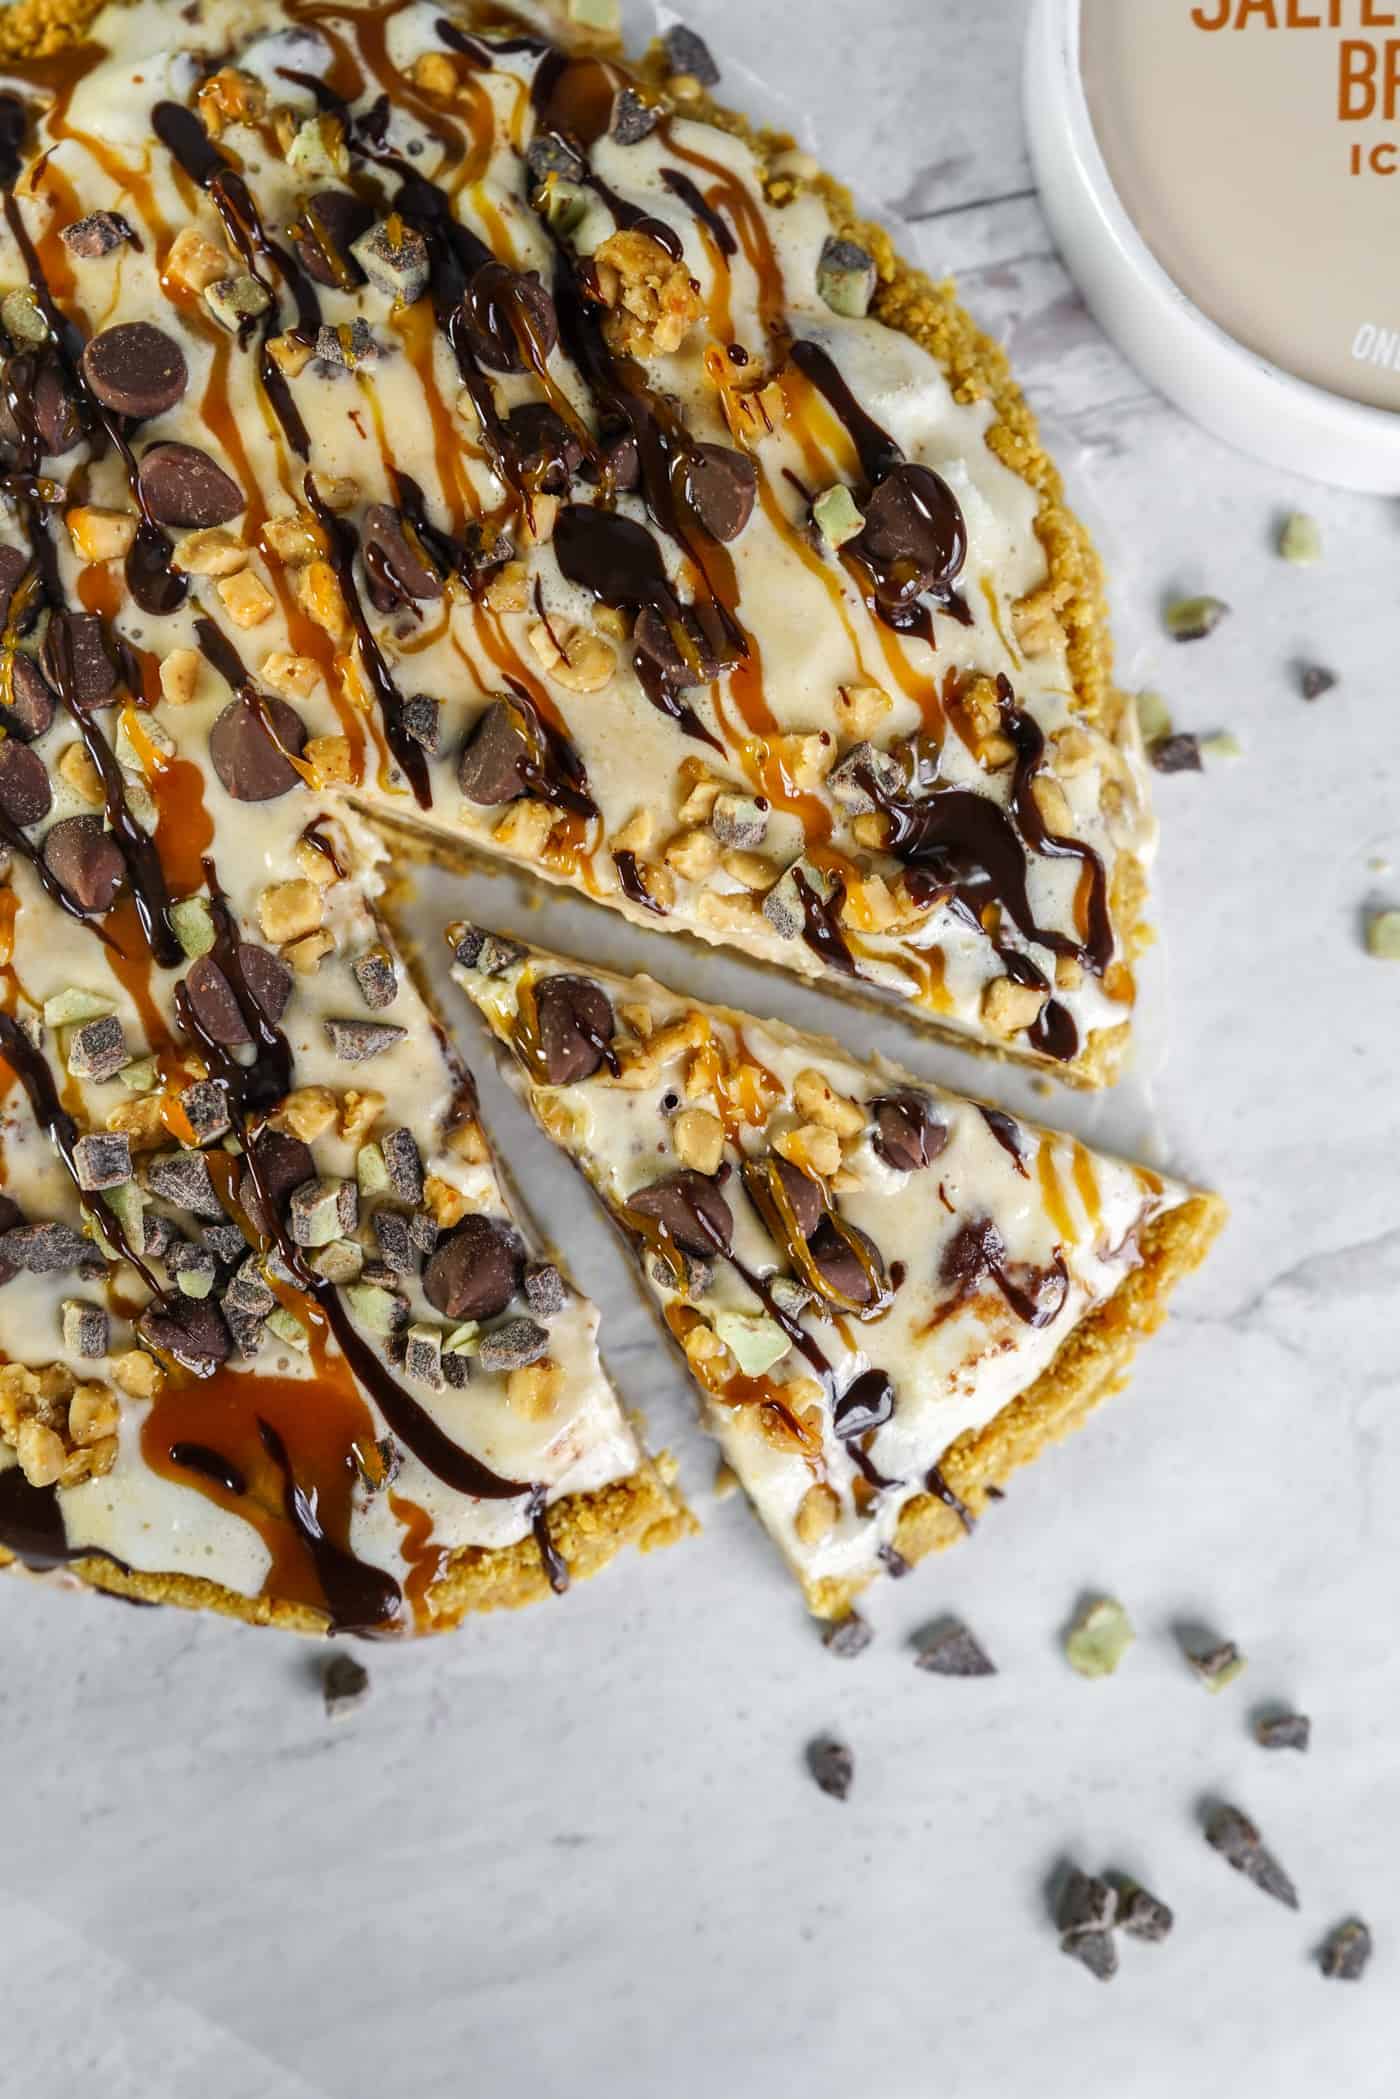 A Lily Love Affair shares a recipe for ice cream pizza topped with Hudsonville Ice Cream and chocolate chips